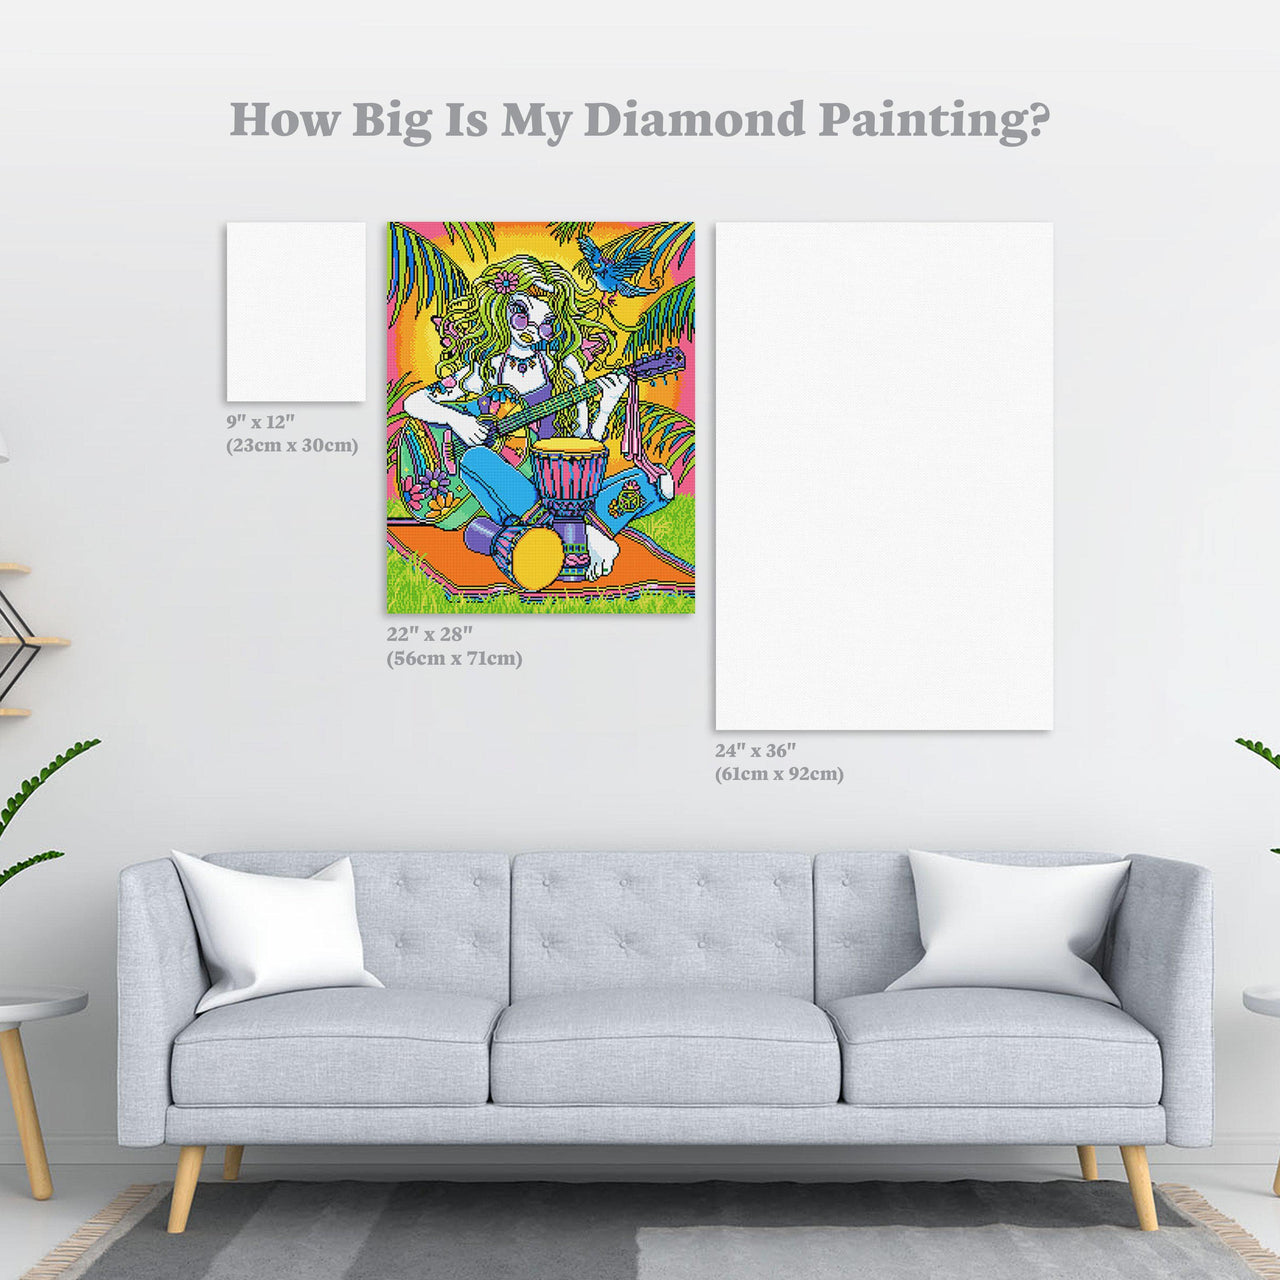 Diamond Painting Melody 22" x 28″ (56cm x 71cm) / Round With 31 Colors Including 2 ABs / 49,896